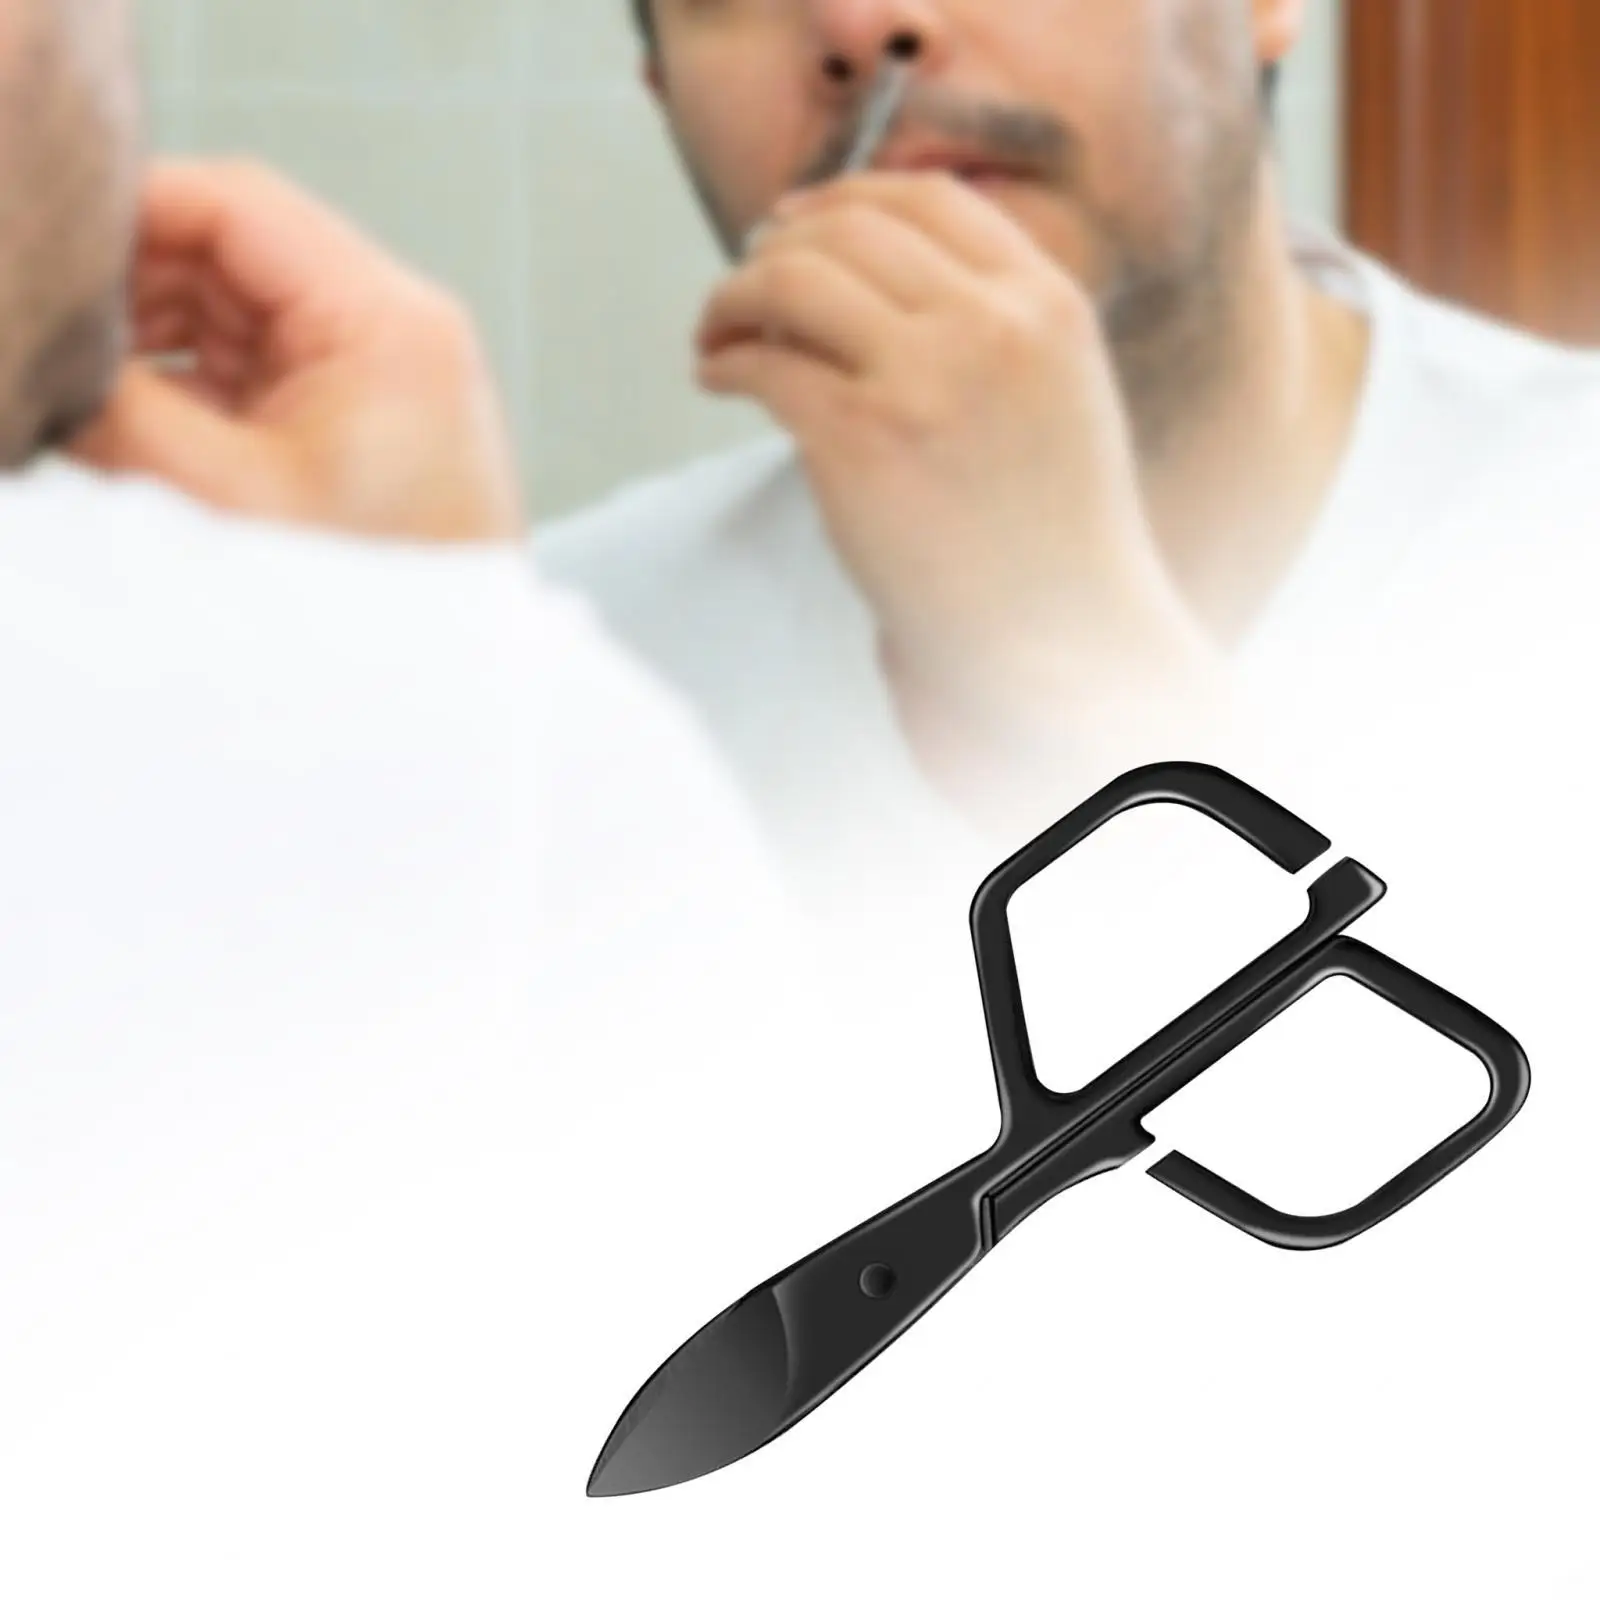 Nose Hair Scissors Accessories Exquisite Practical Small Scissors Beauty for Eyelashes Eyebrow Trimming Beard Ear Hair